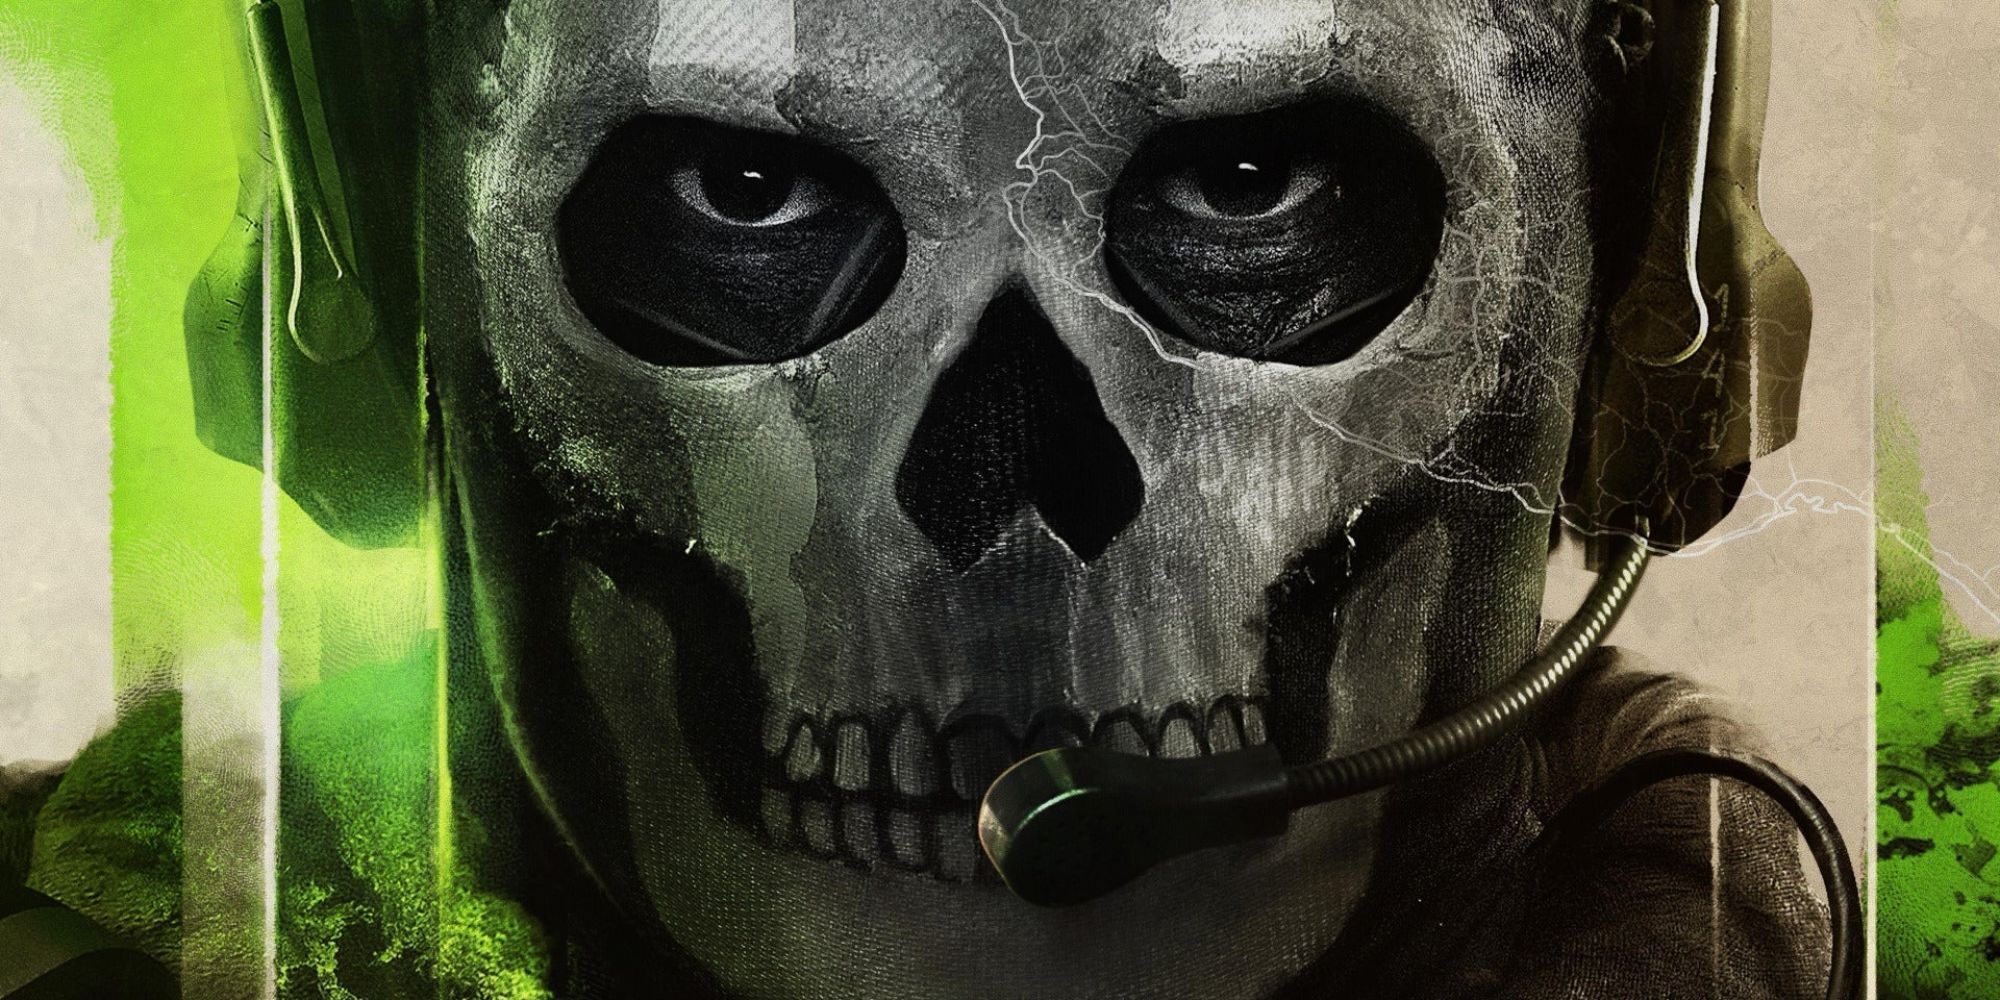 Ghost on the promotional art for Call of Duty Modern Warfare 2.